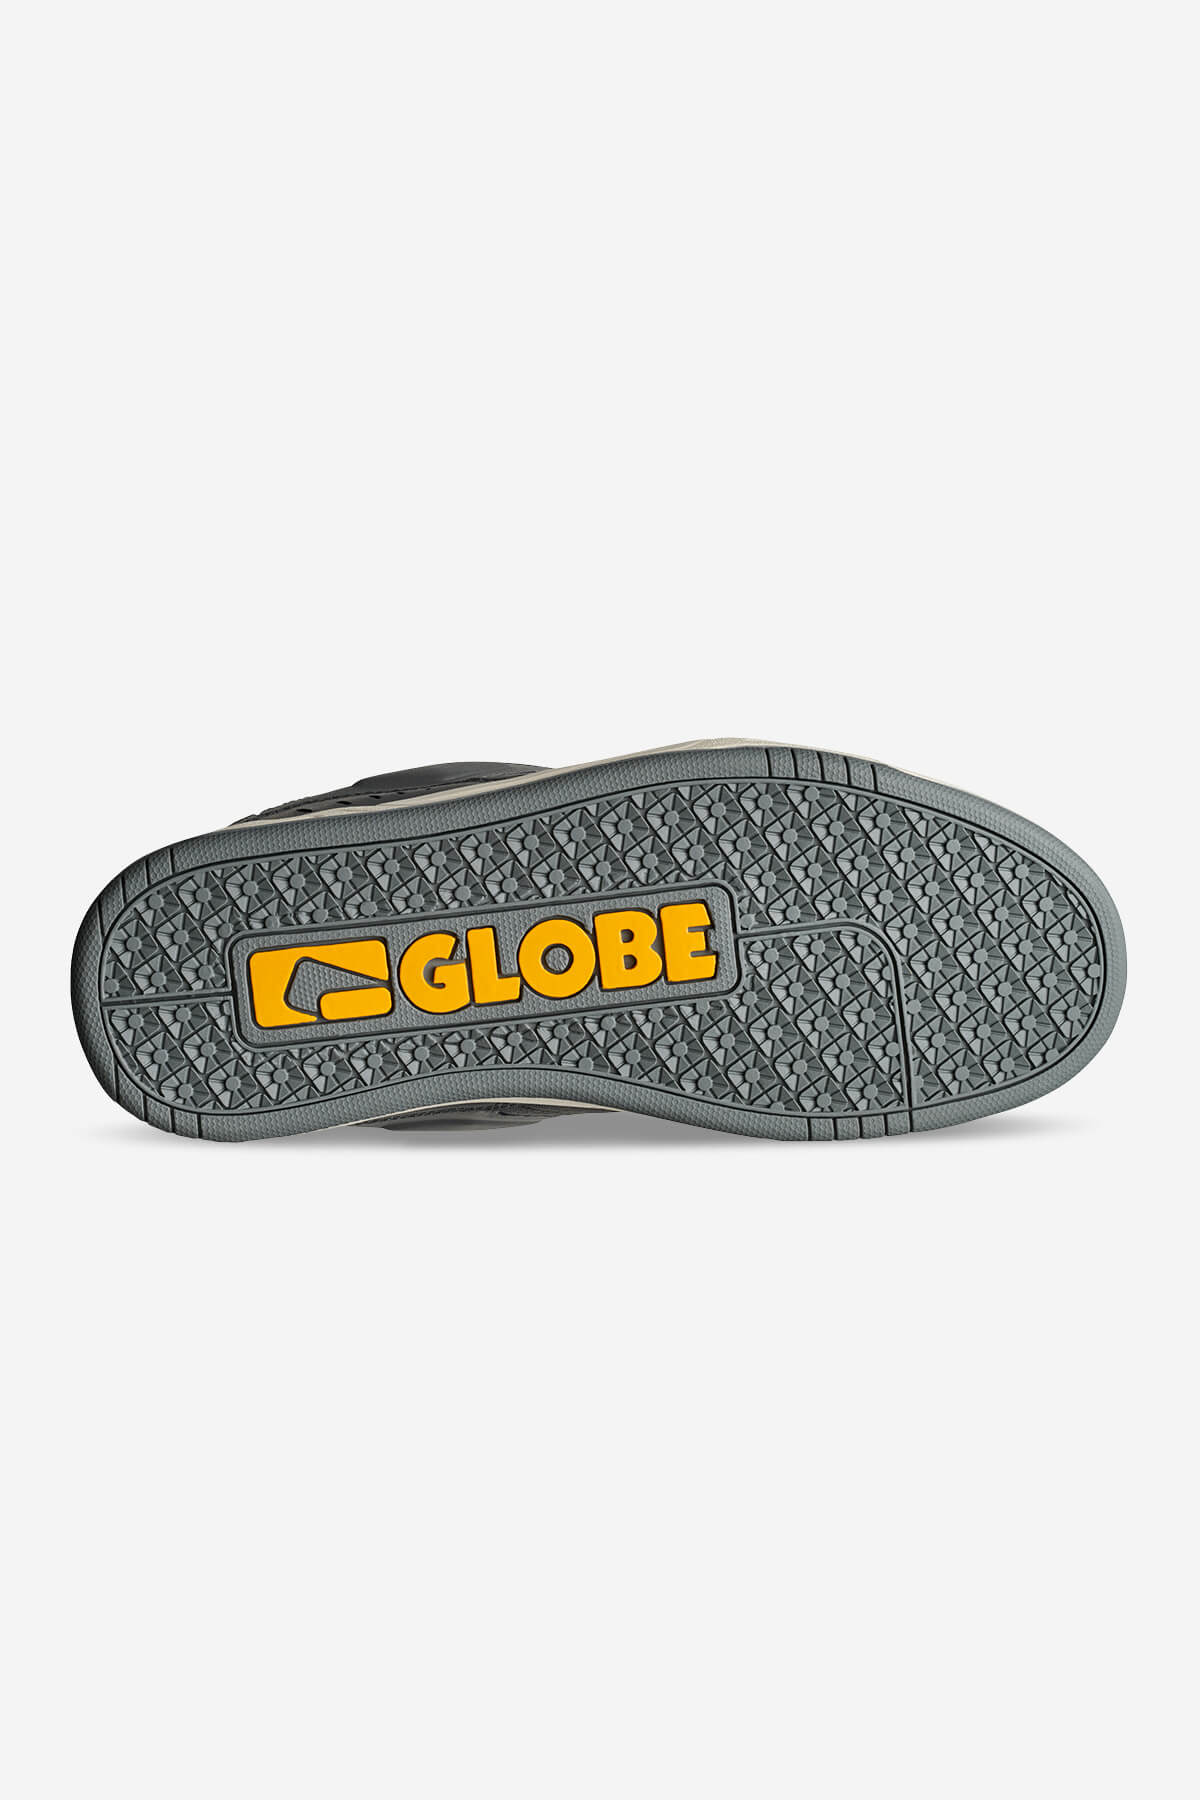 Globe - Fusion - Lead/Antique - skateboard Chaussures